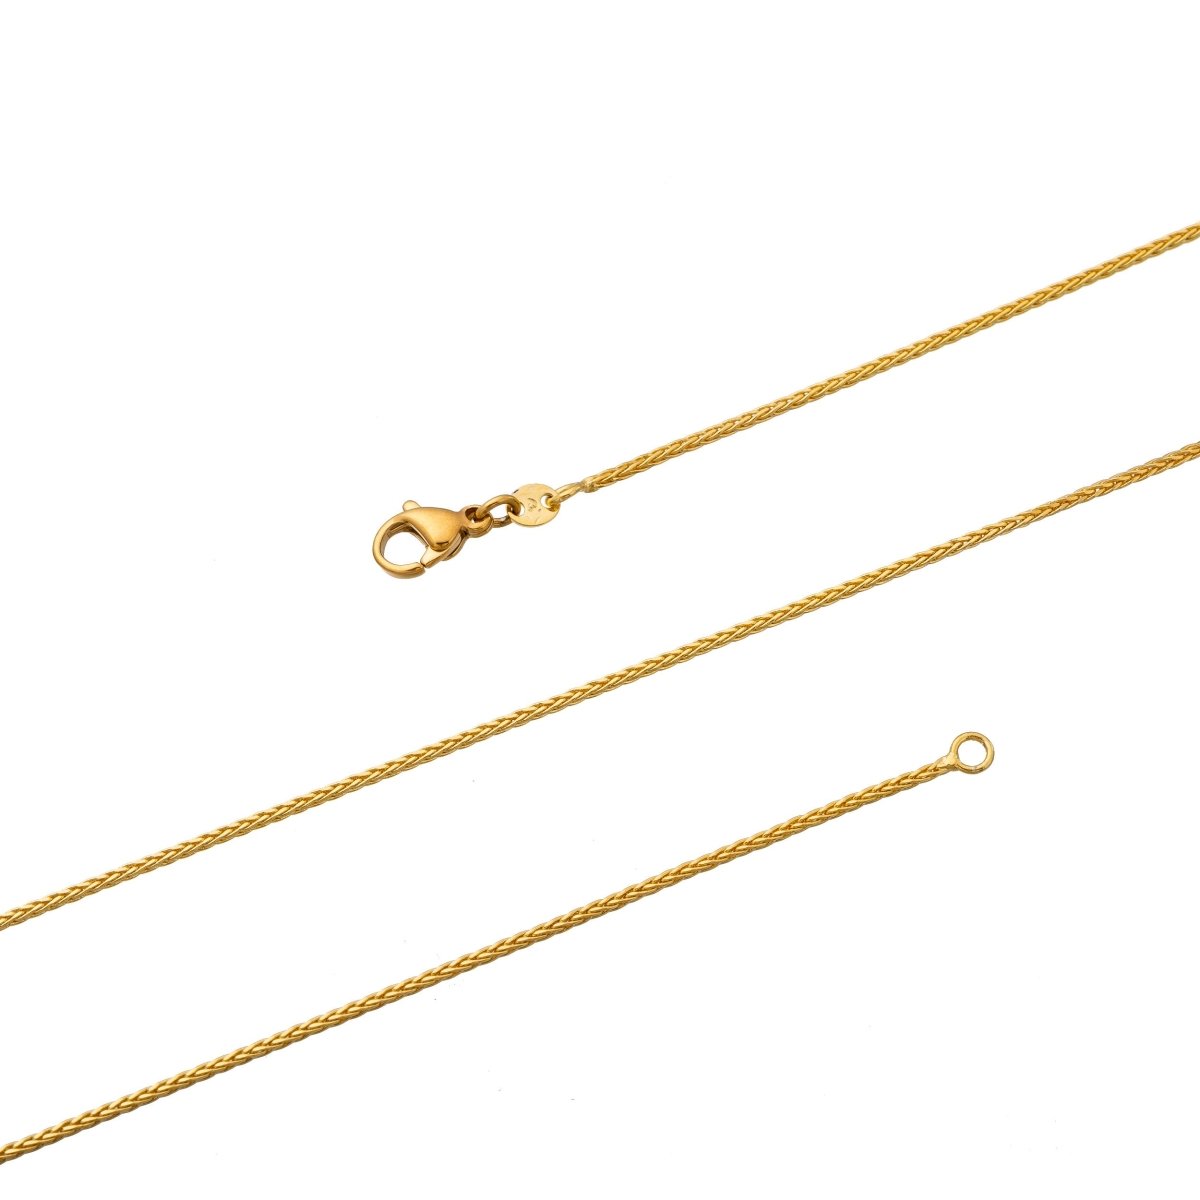 24K Gold Filled Wheat Necklace - Wheat Necklace - Dainty 1.3mm 17.5 Inches Layering Wheat Necklace w/ Spring Rings | CN-187 Clearance Pricing - DLUXCA